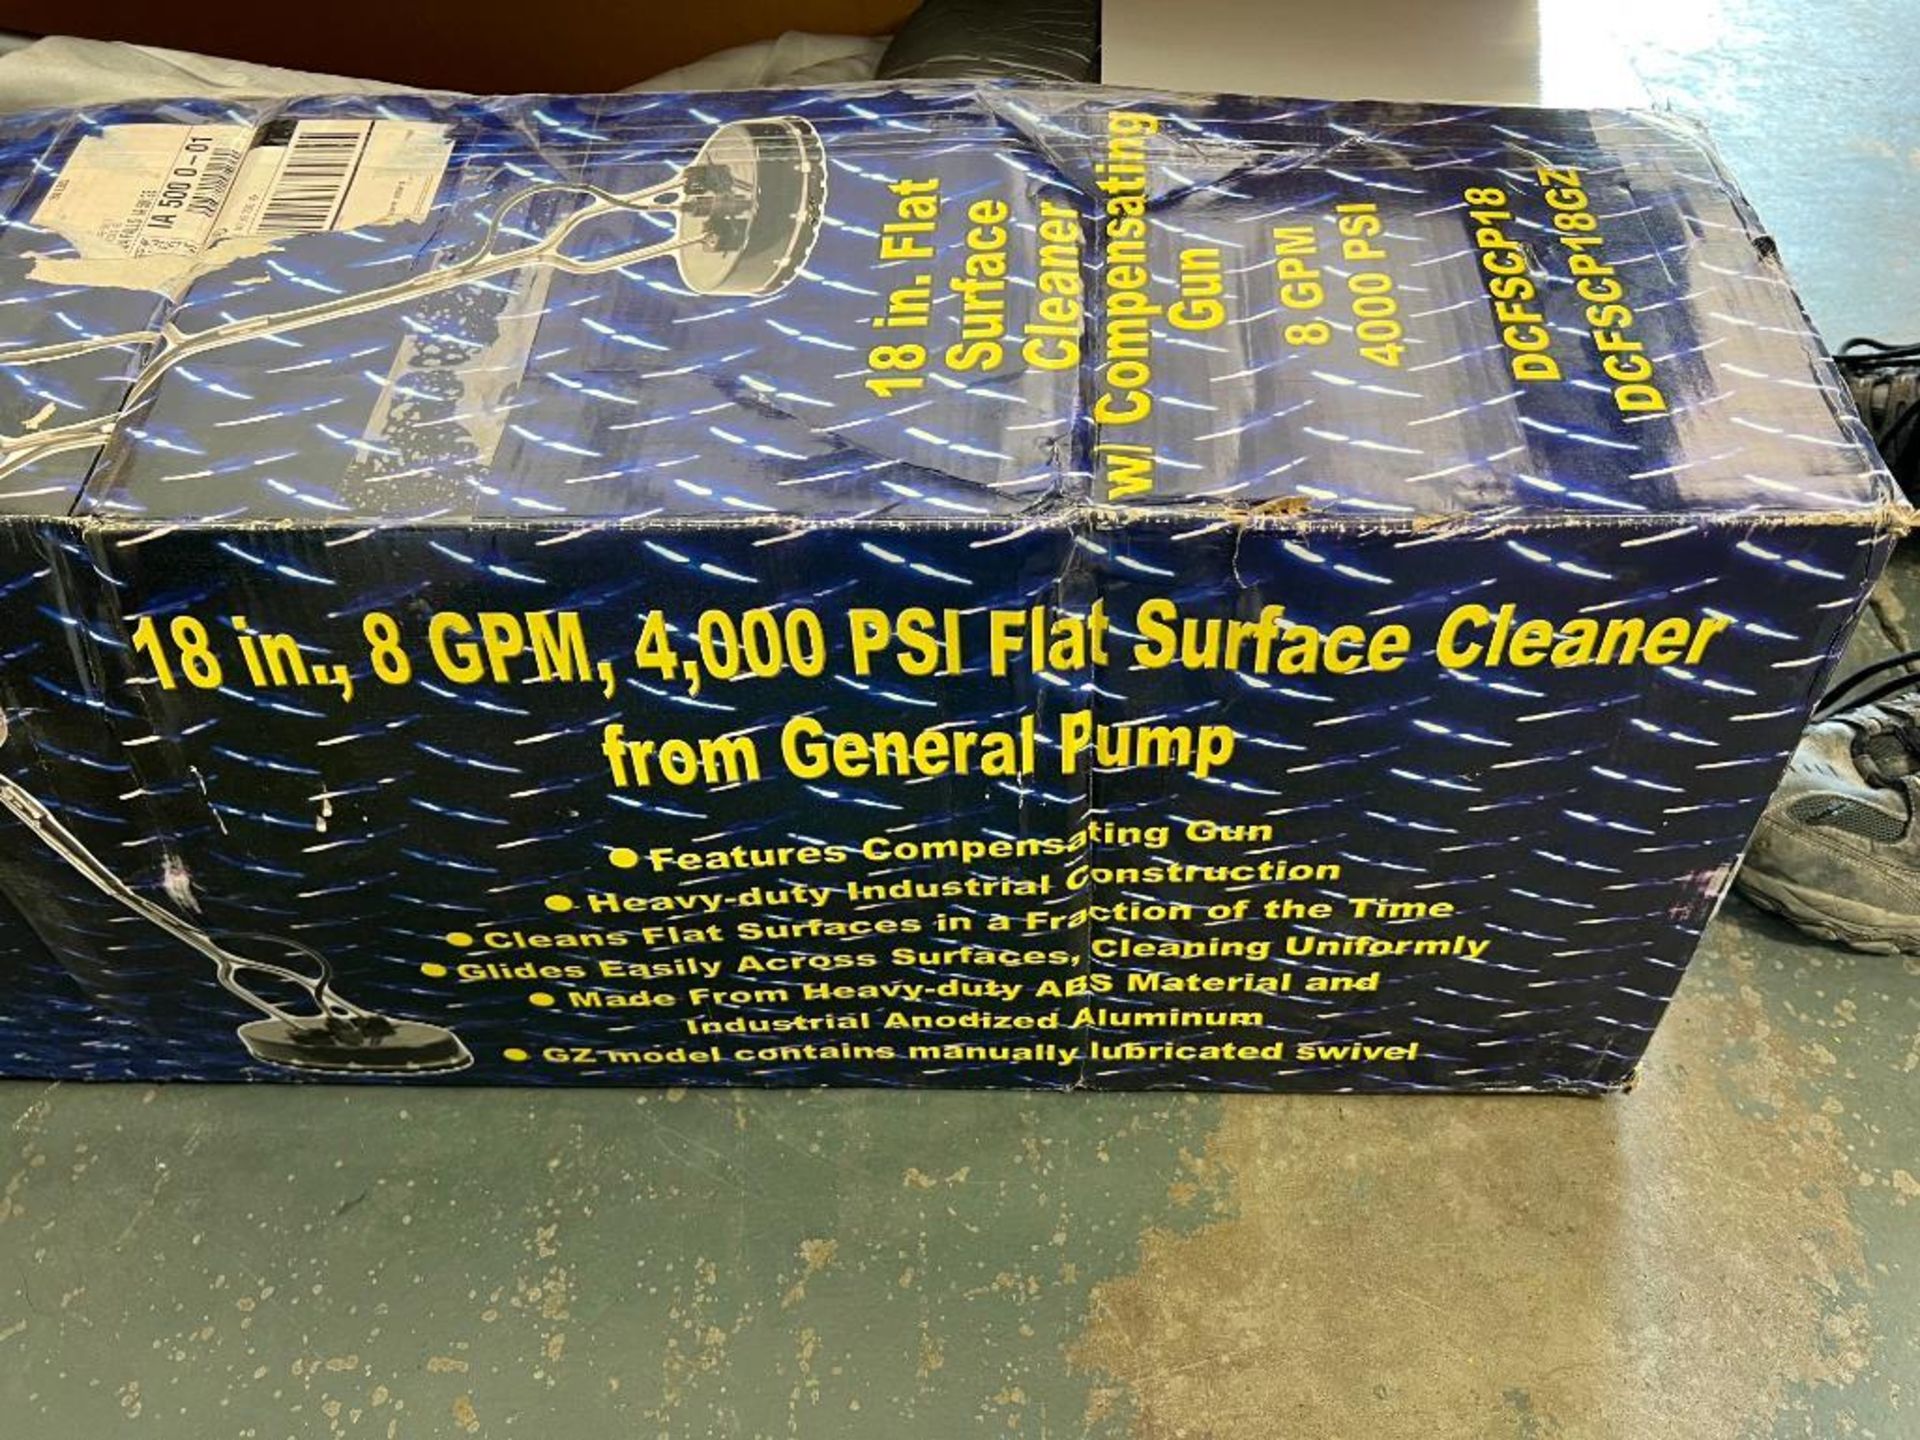 Box General Pump 18", 8GPM, 4,000 PSI Flat Surface Cleaner. Located in Mt. Pleasant, IA - Image 2 of 2